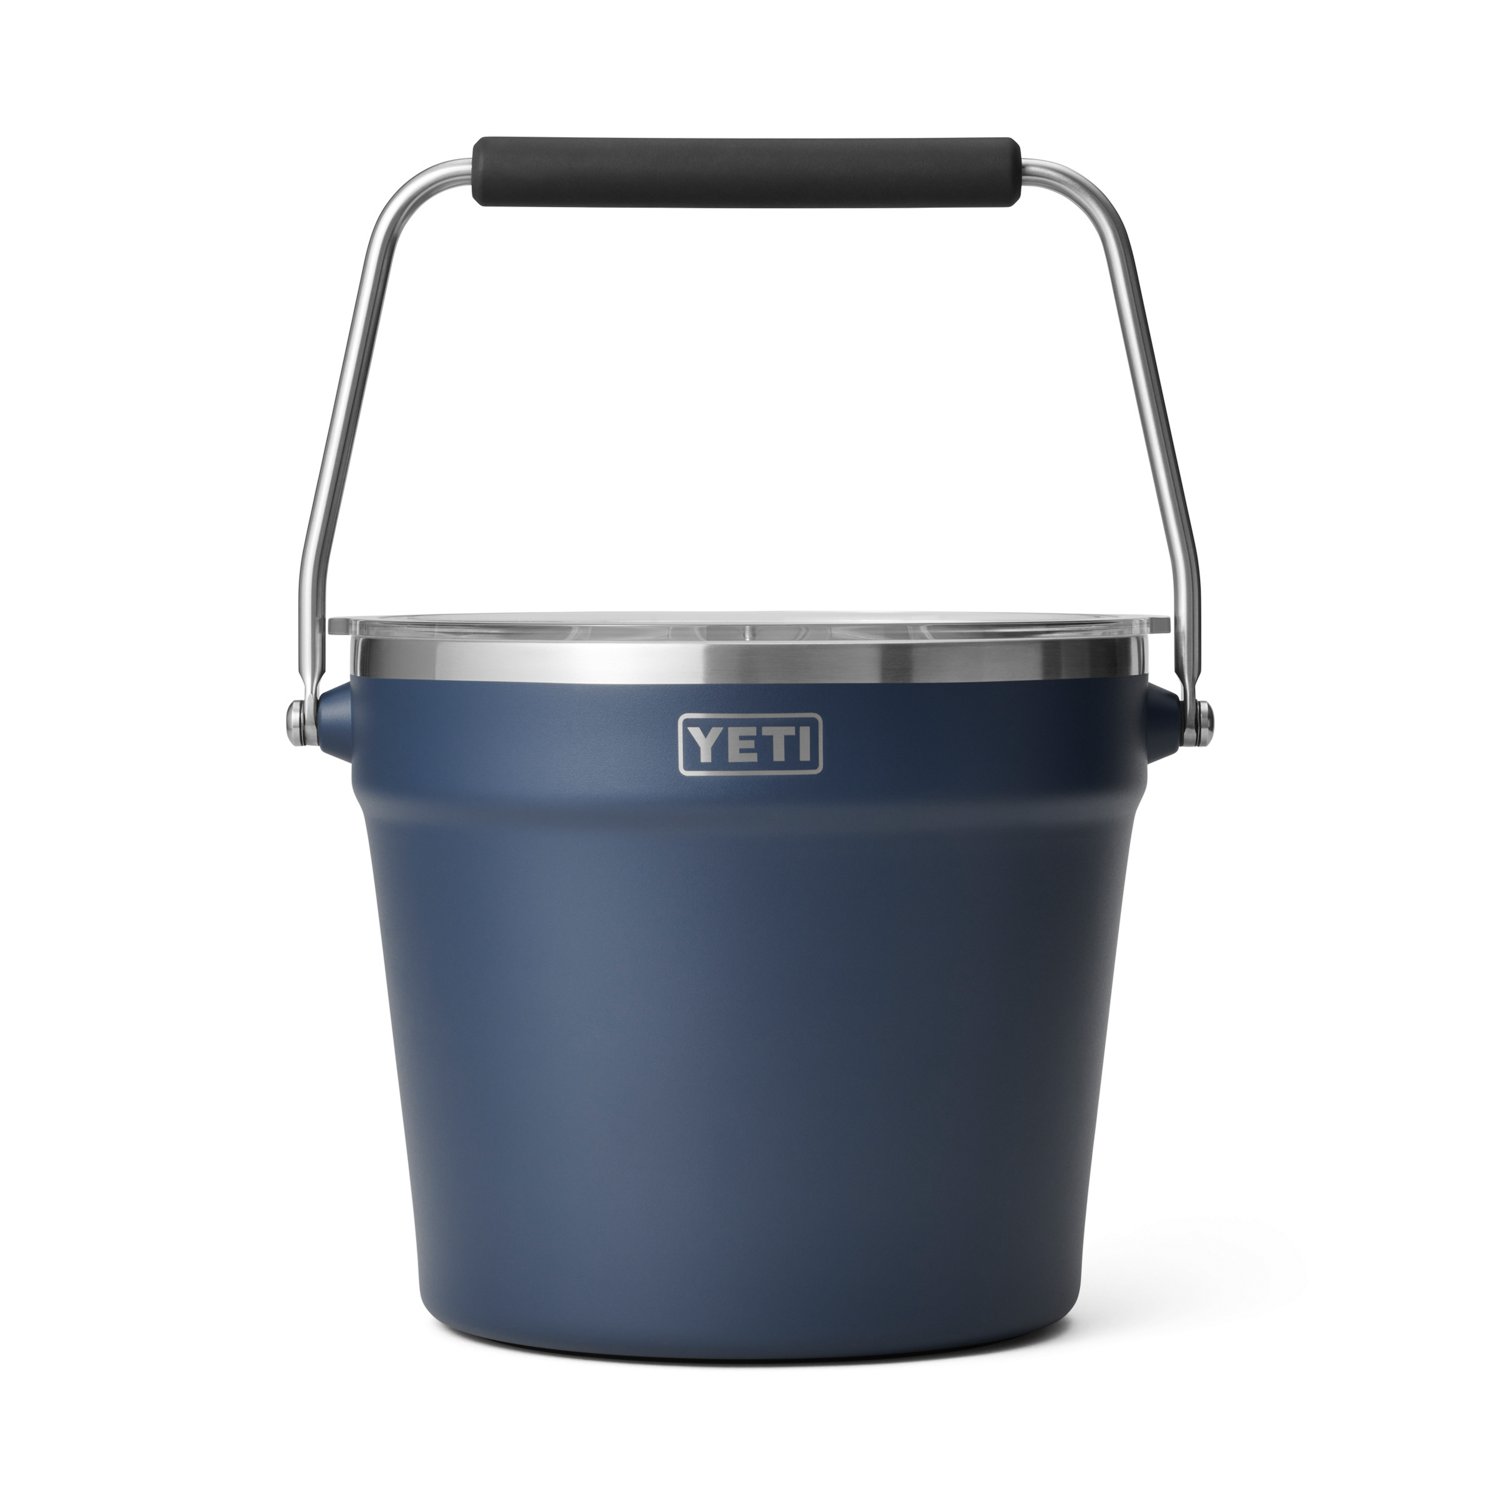  YETI LoadOut Bucket Caddy Accessory : Health & Household